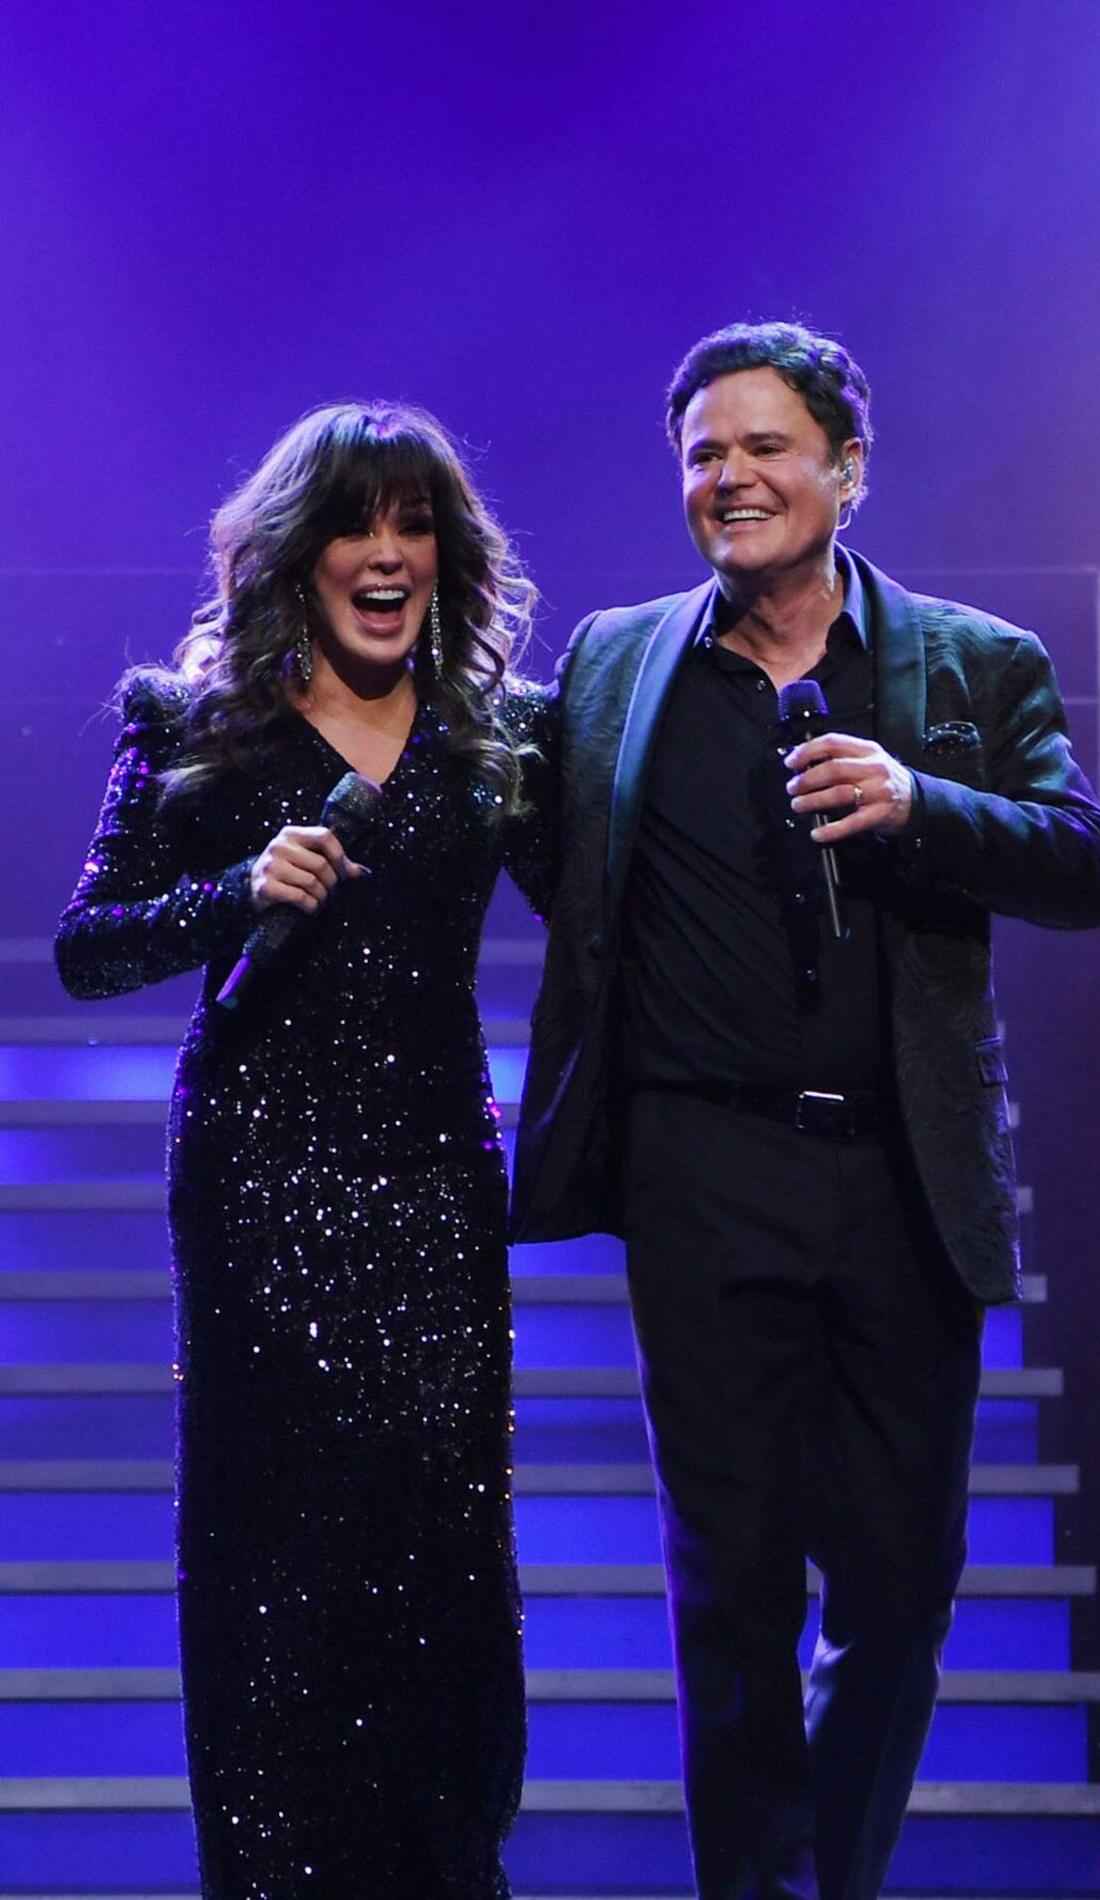 A Donny & Marie live event